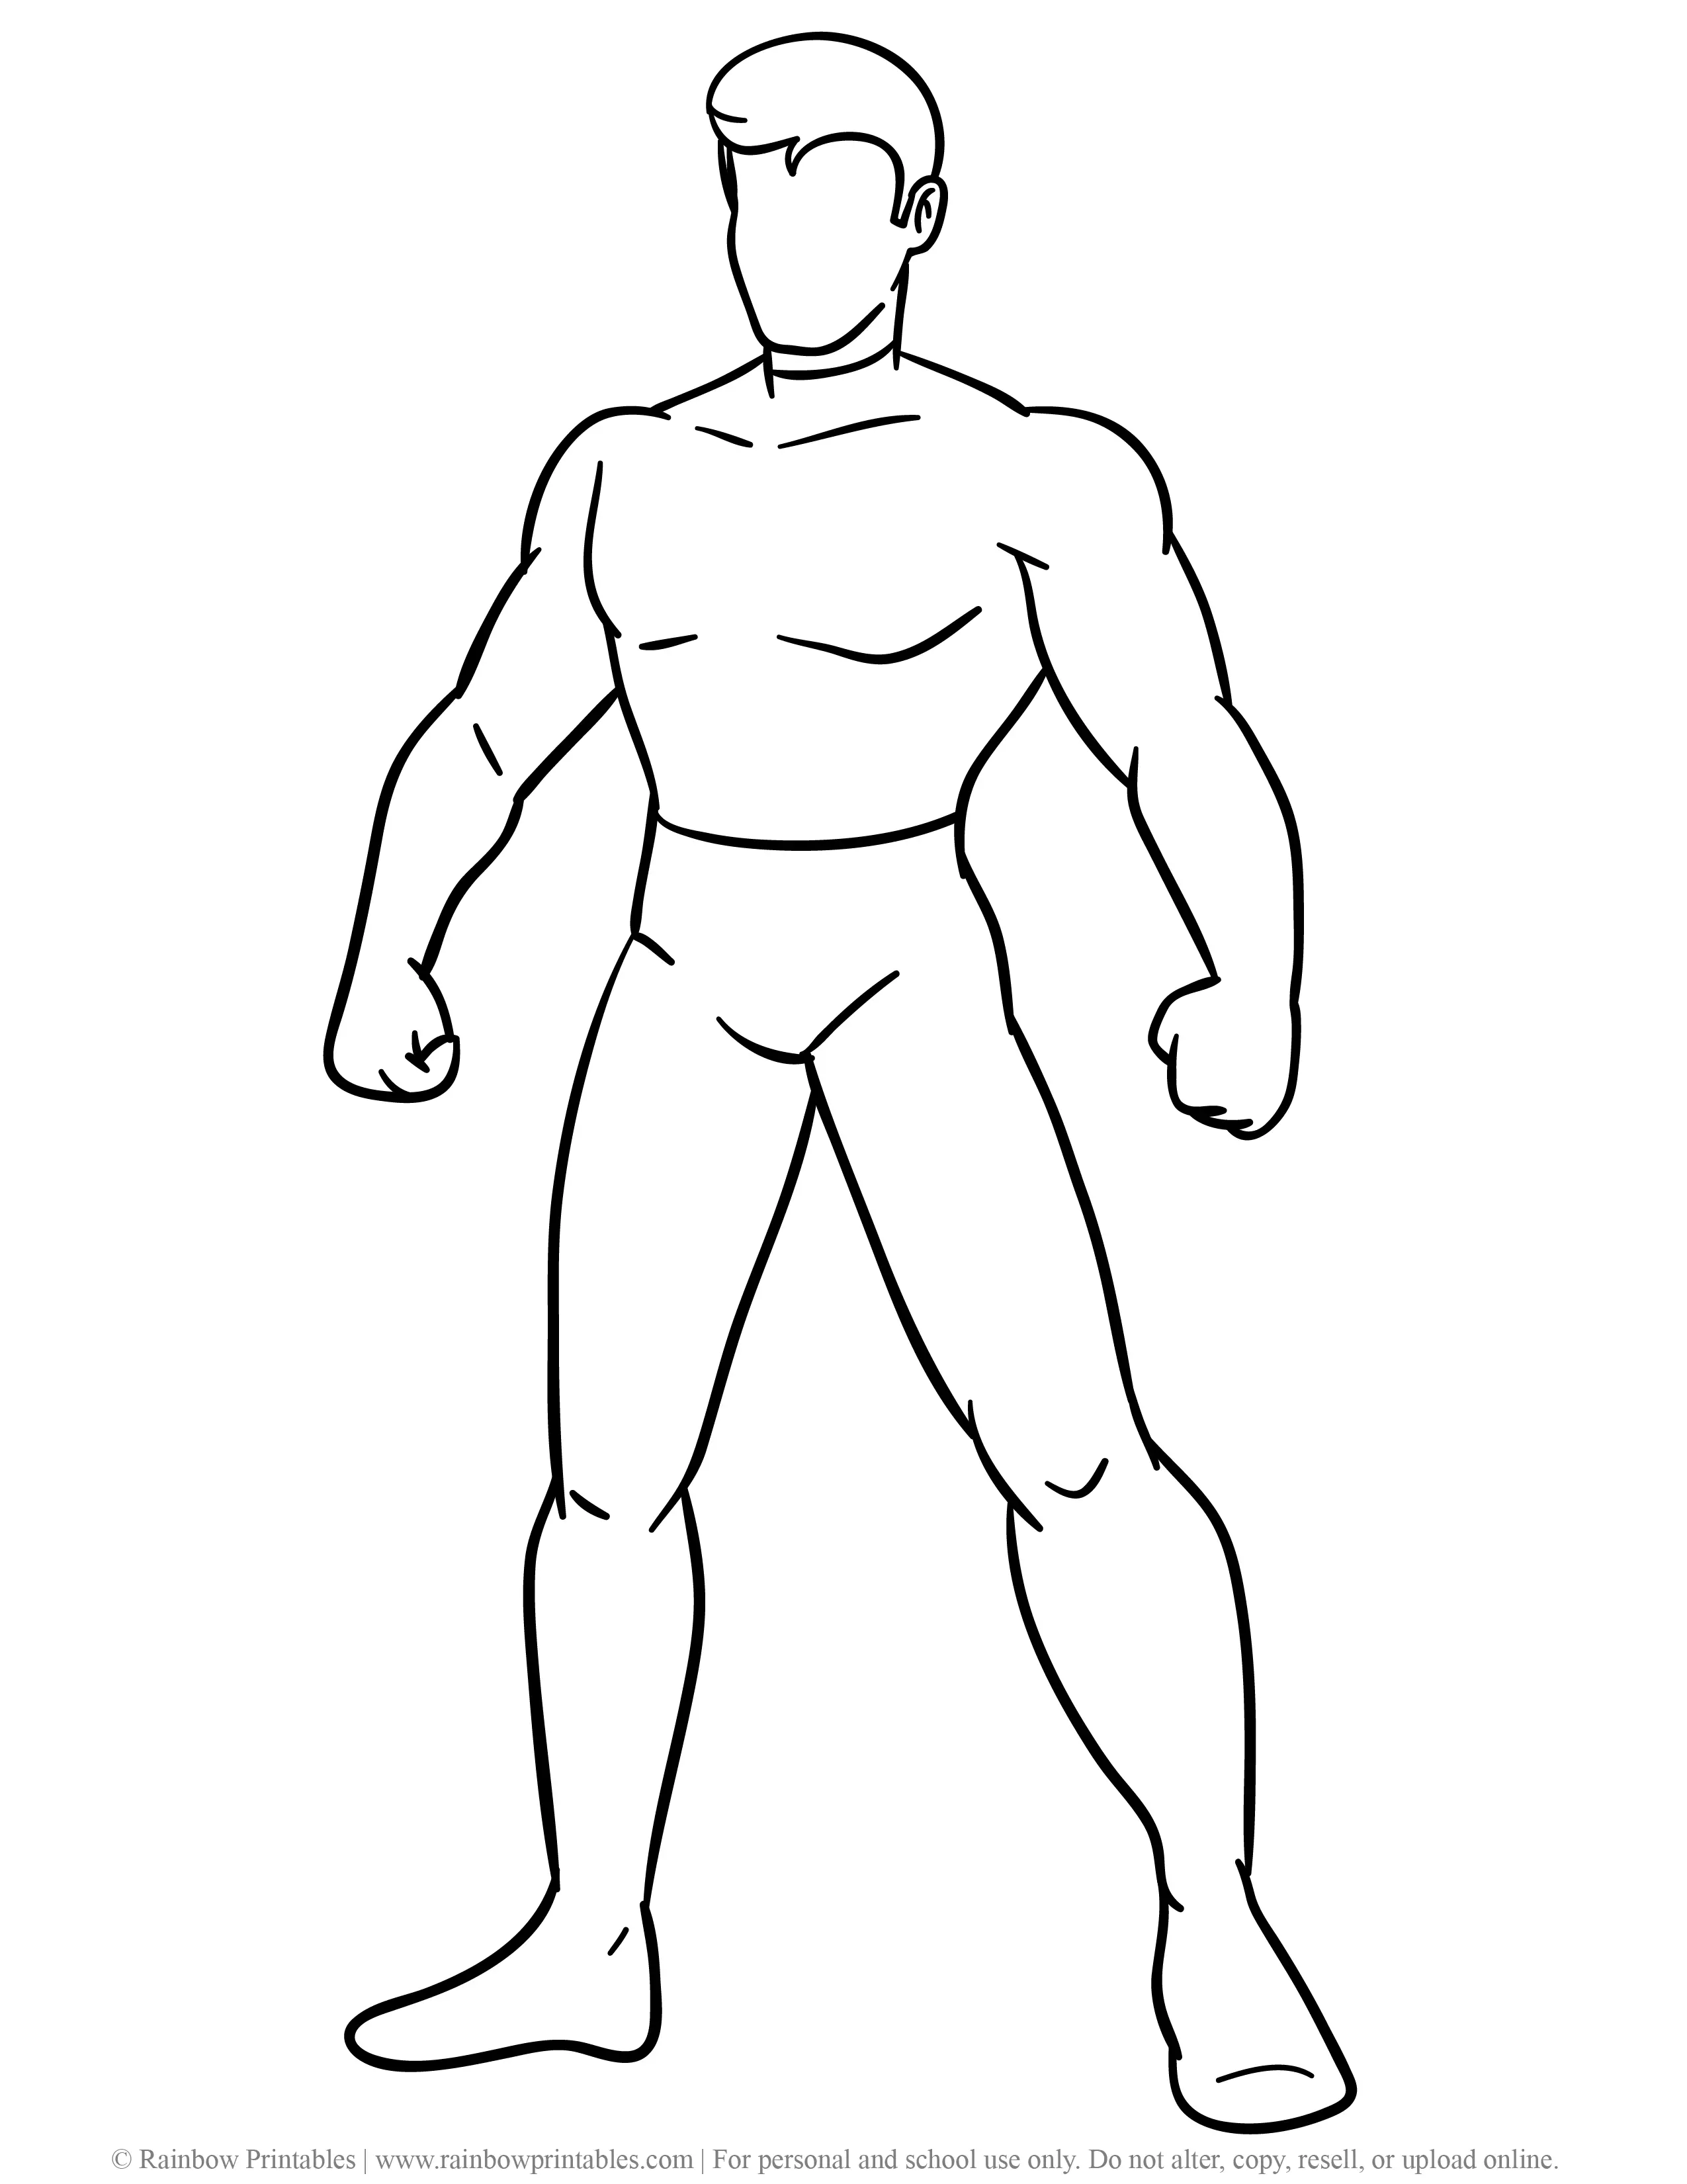 Free Coloring Pages for Kids Drawing Activities Line Art Illustration MALE SUPERHERO OUTLINE TEMPLATES